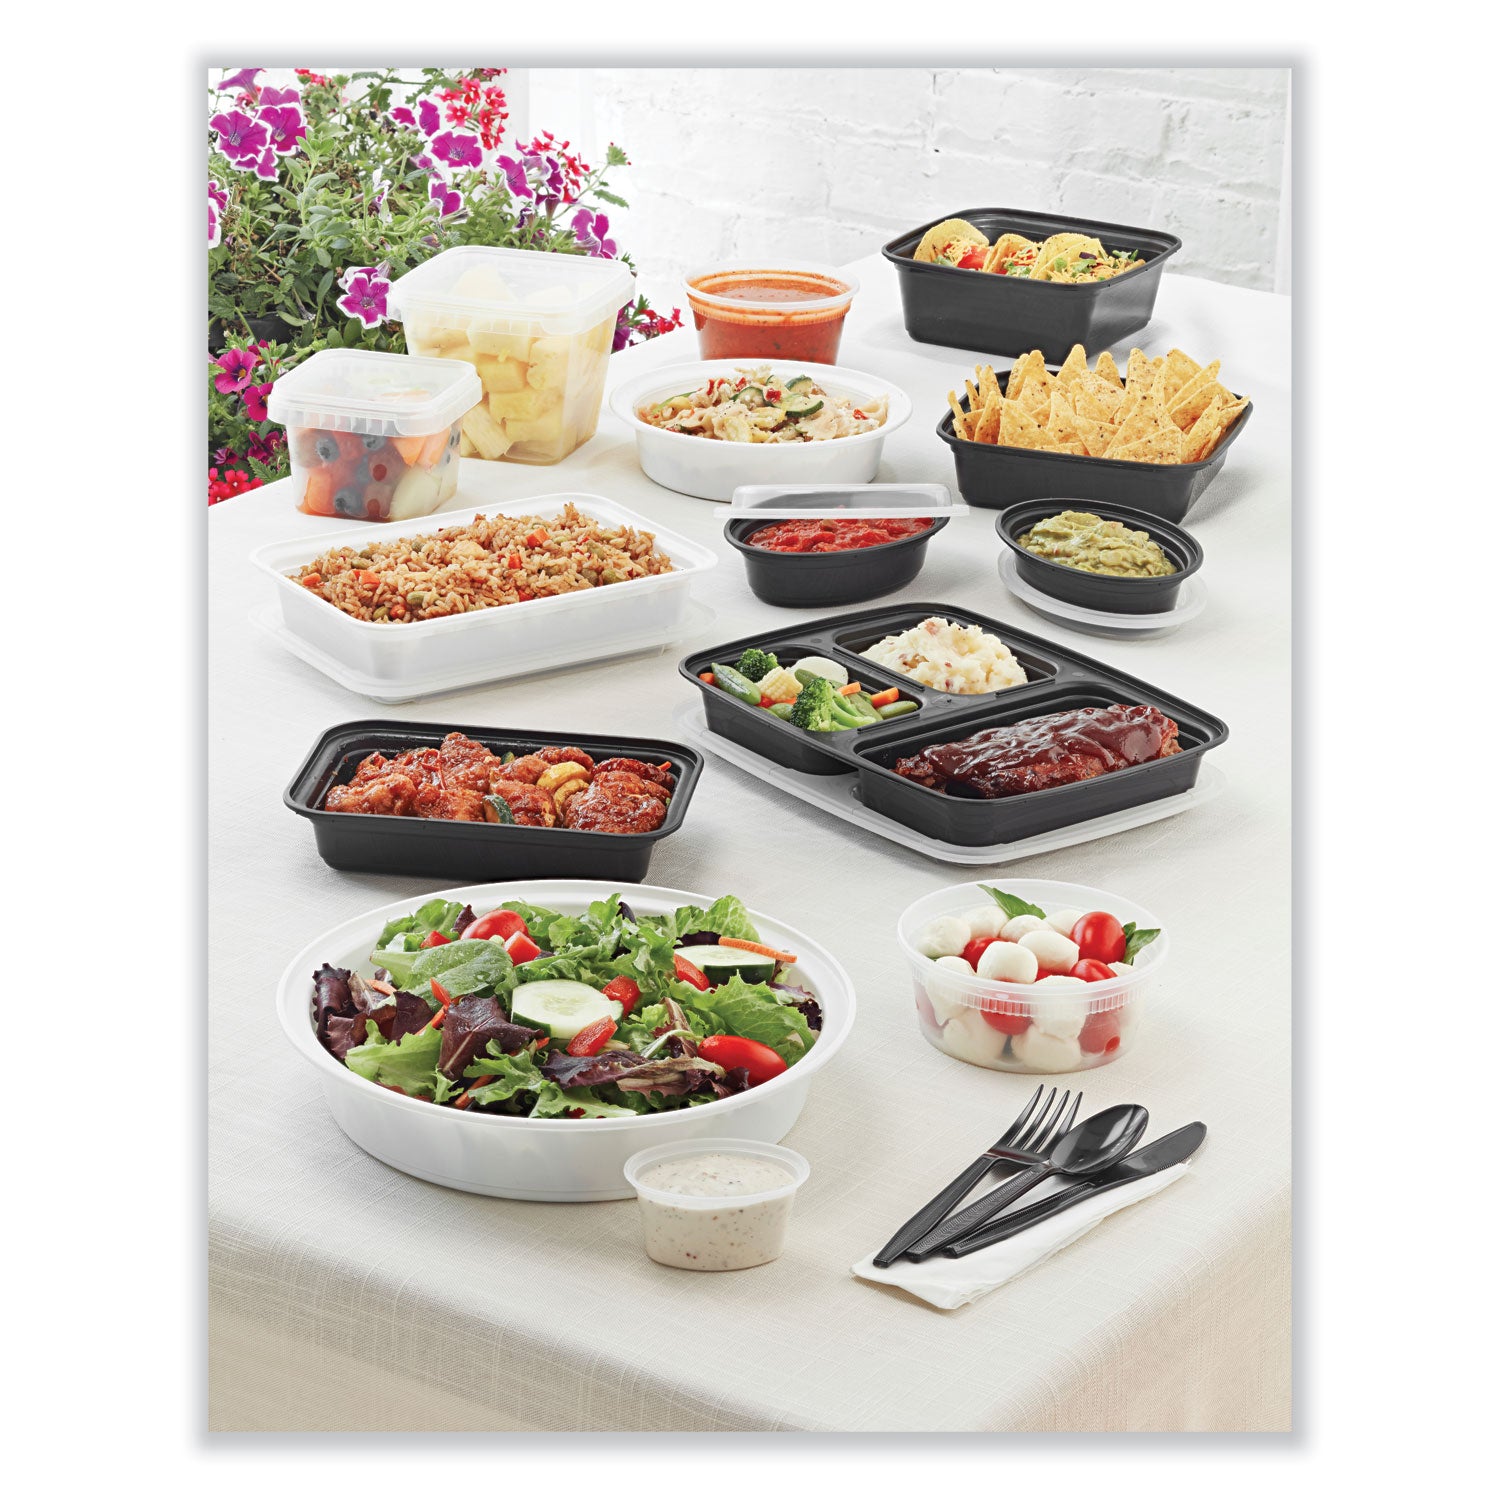 newspring-versatainer-microwavable-containers-round-3-compartment-39-oz-9-x-9-x-225-black-clear-plastic-150-carton_pctnc9388b - 4